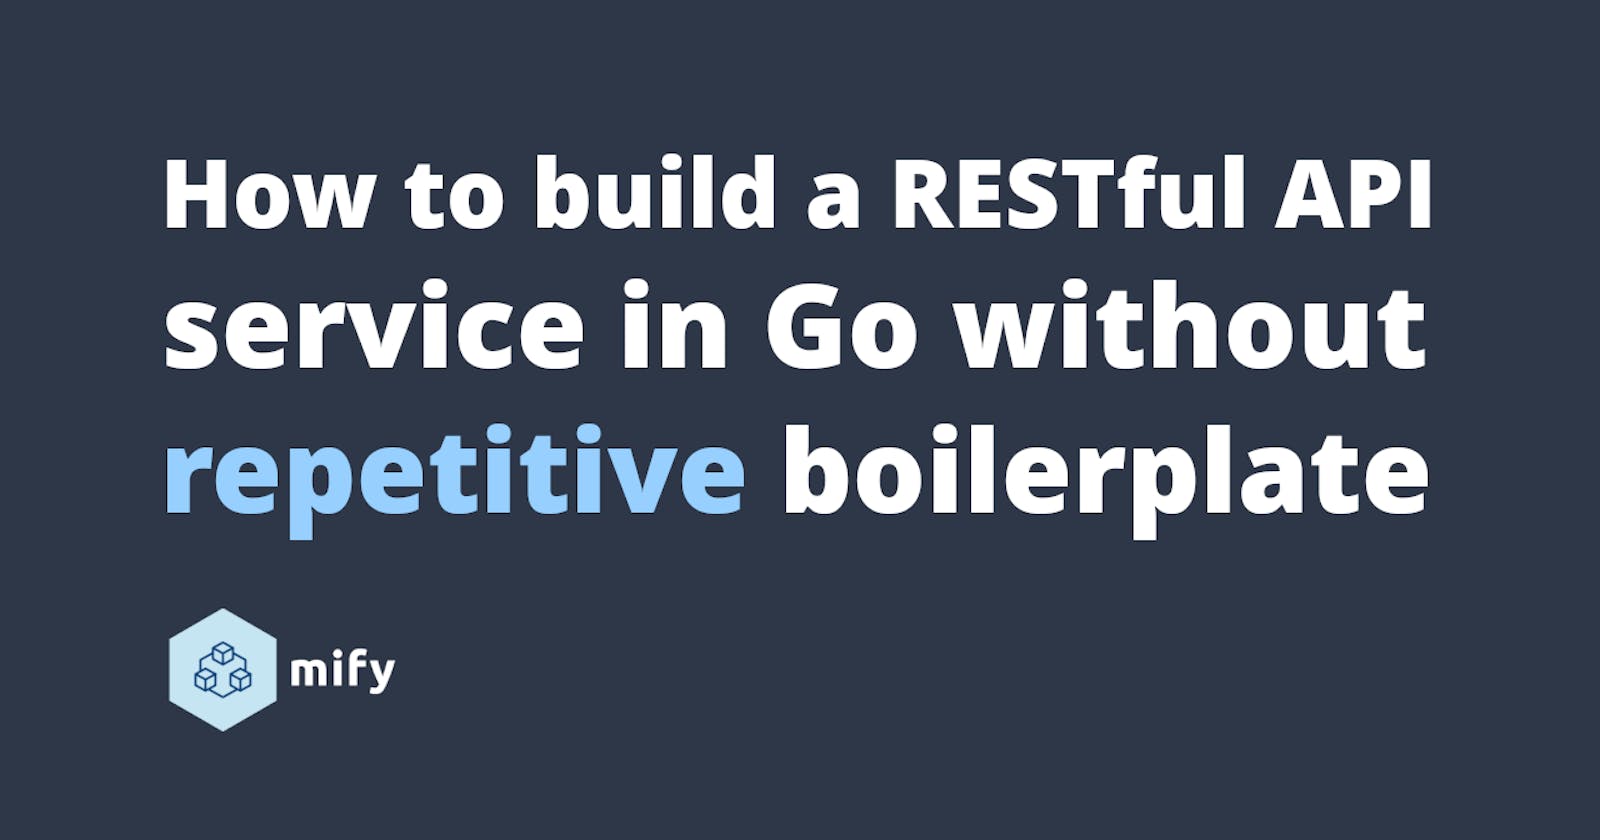 How to build a RESTful API service in Go without repetitive boilerplate